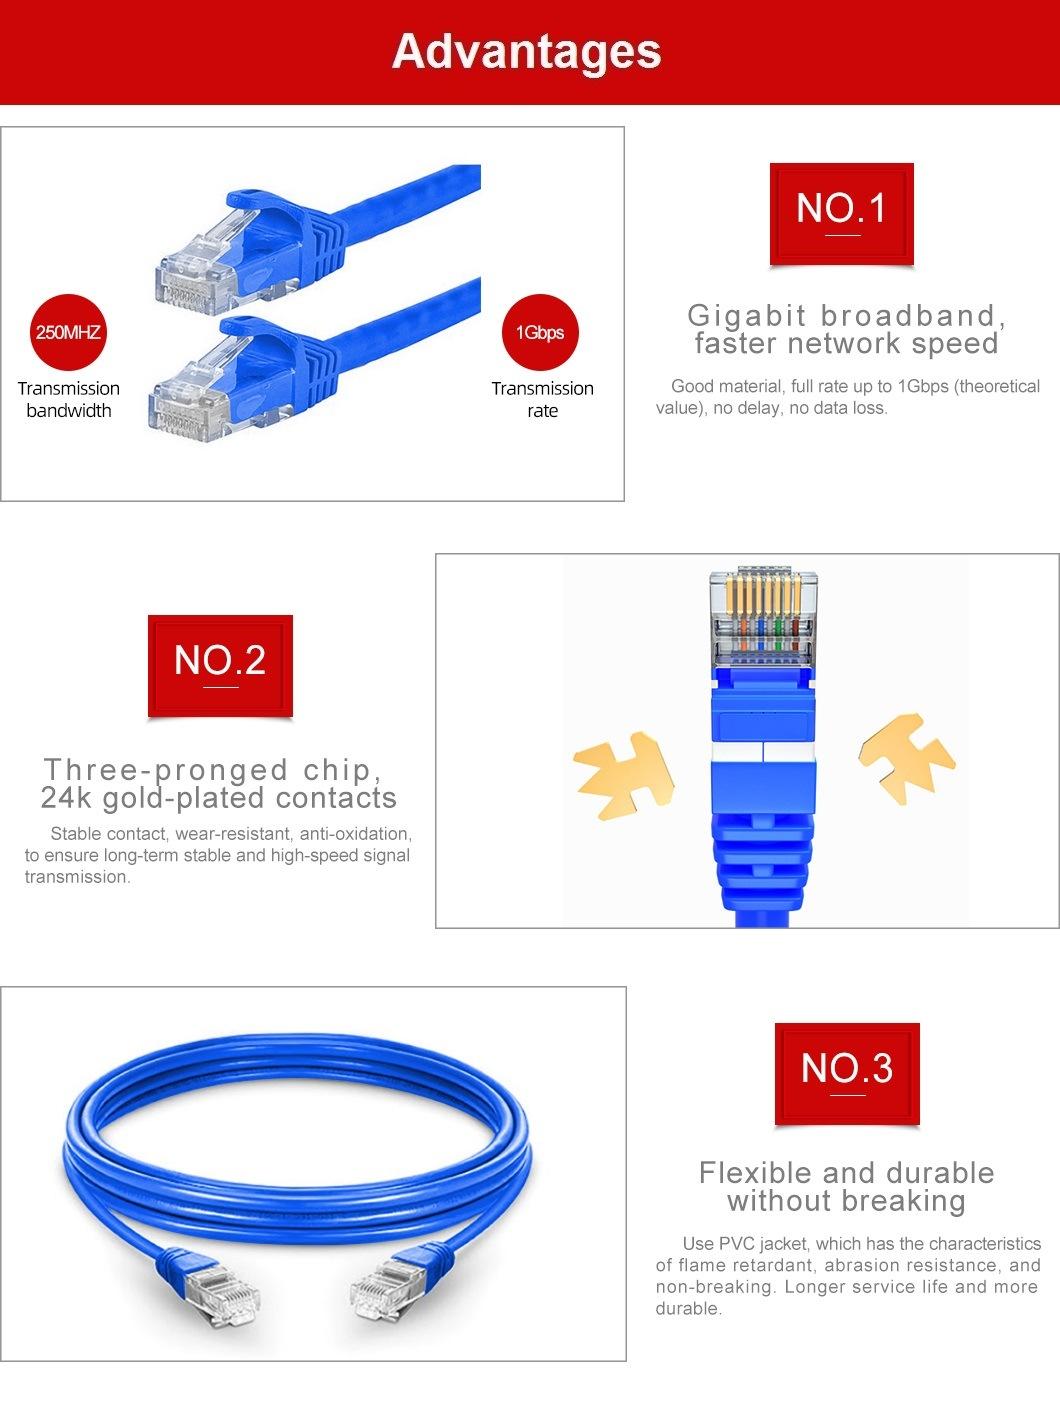 LAN Cable Patch Cord Cable UTP FTP Cat5e CAT6 CAT6A Cat7 Patch Cords with RJ45 Connector